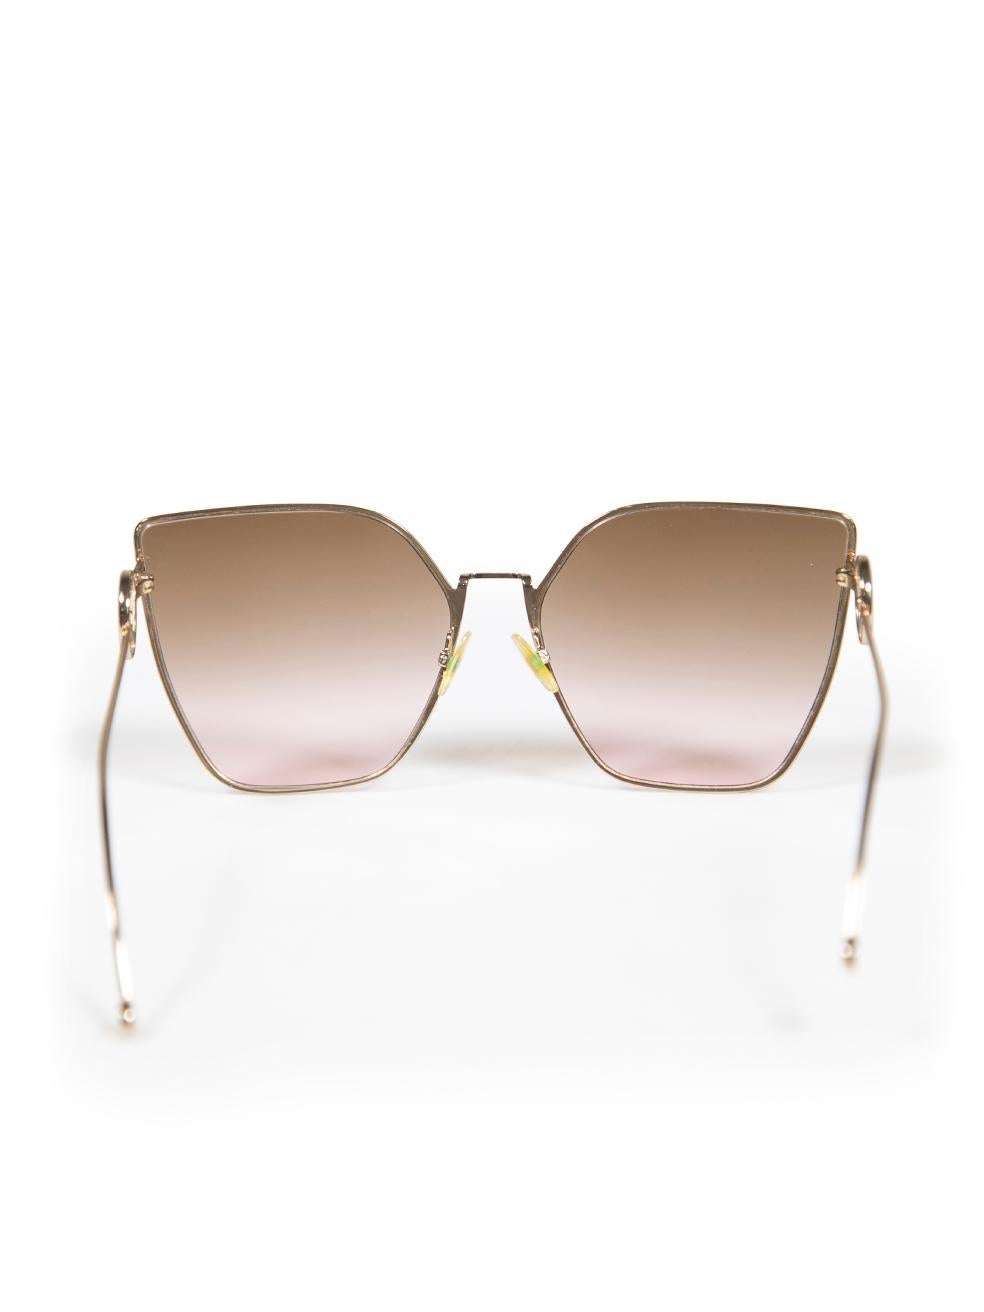 Fendi Gold Oversize Cat Eye FF 0323/S Sunglasses In Good Condition For Sale In London, GB